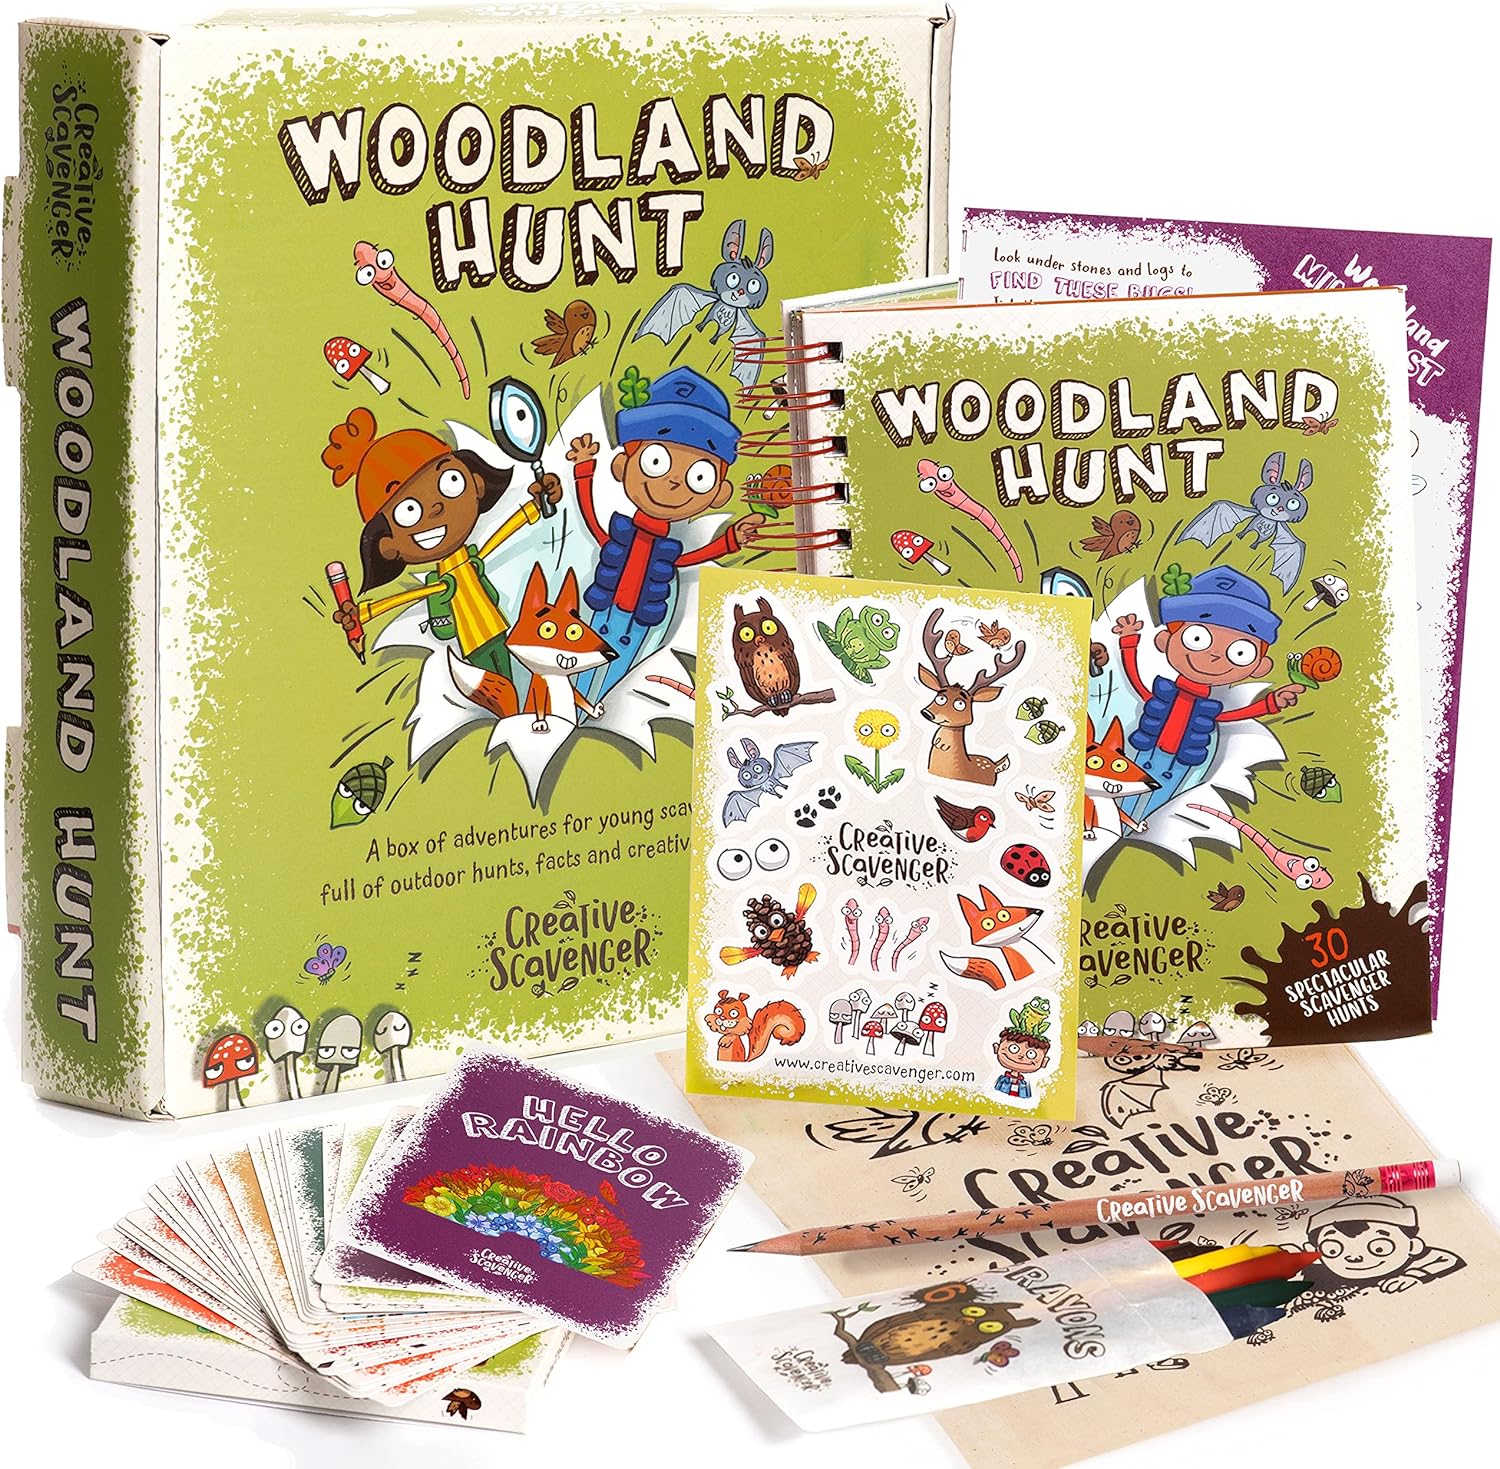 A Creative Scavenger kit, filled with colourful cards, pencils and booklets.